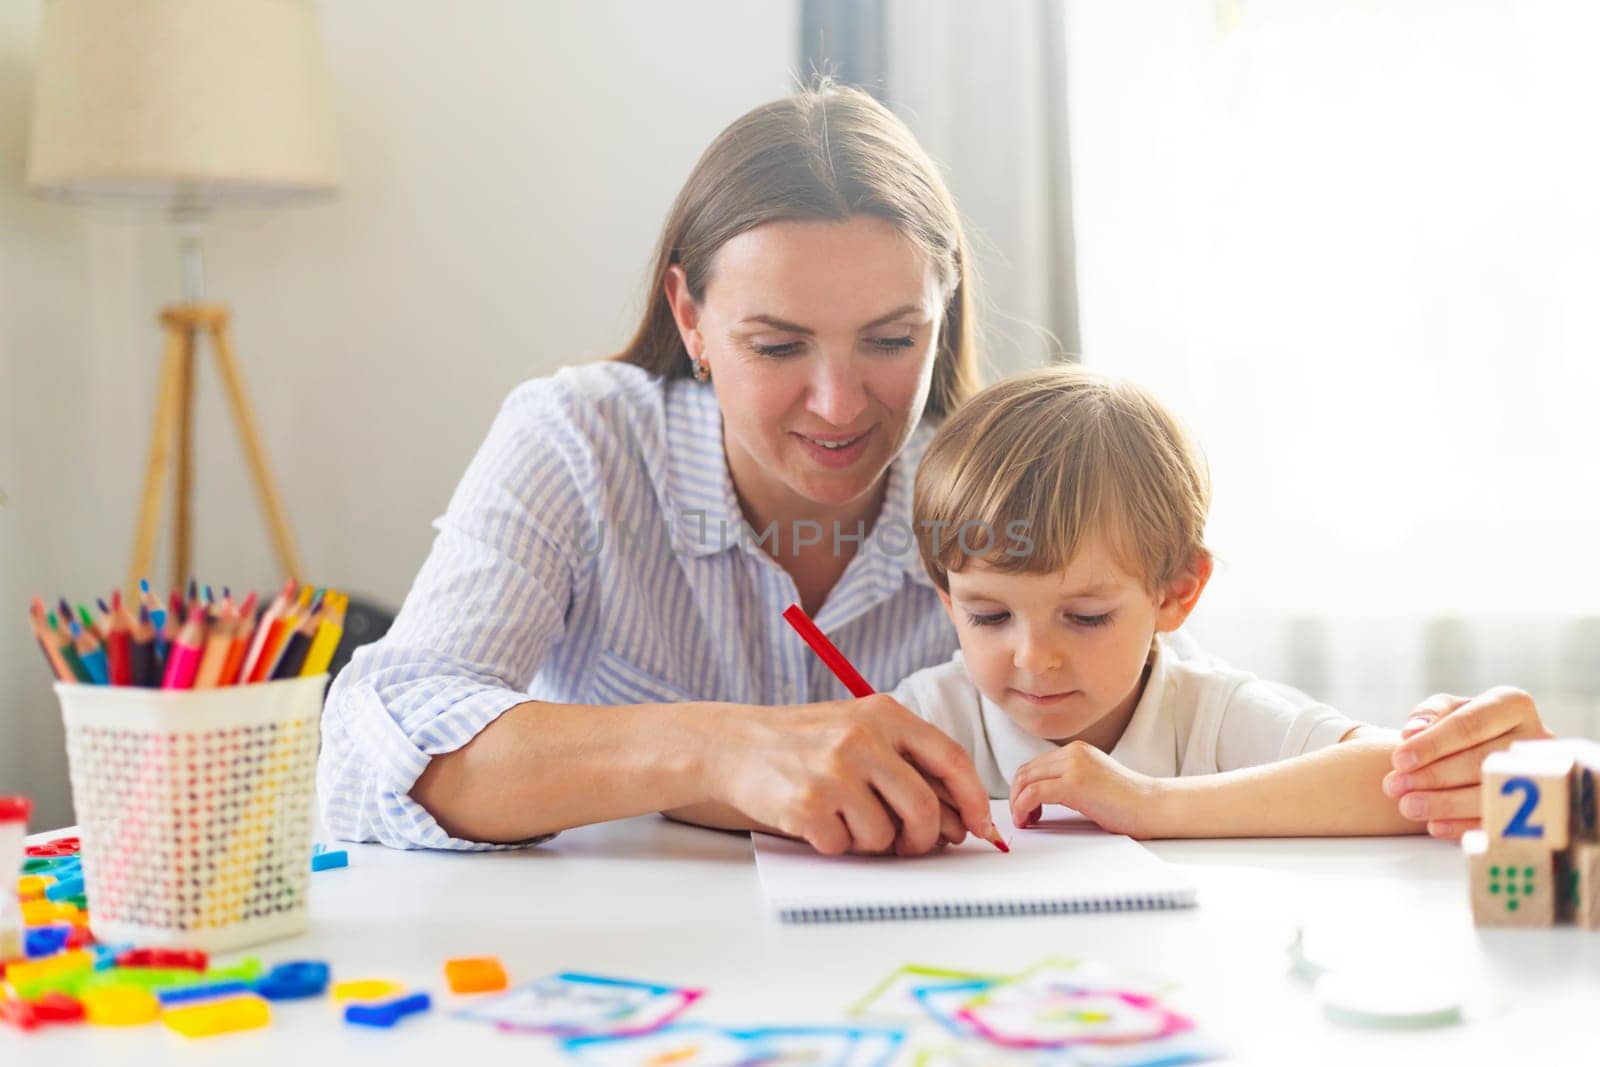 Woman and young boy drawing together, home learning concept. Indoor educational activity for design and greeting cards.